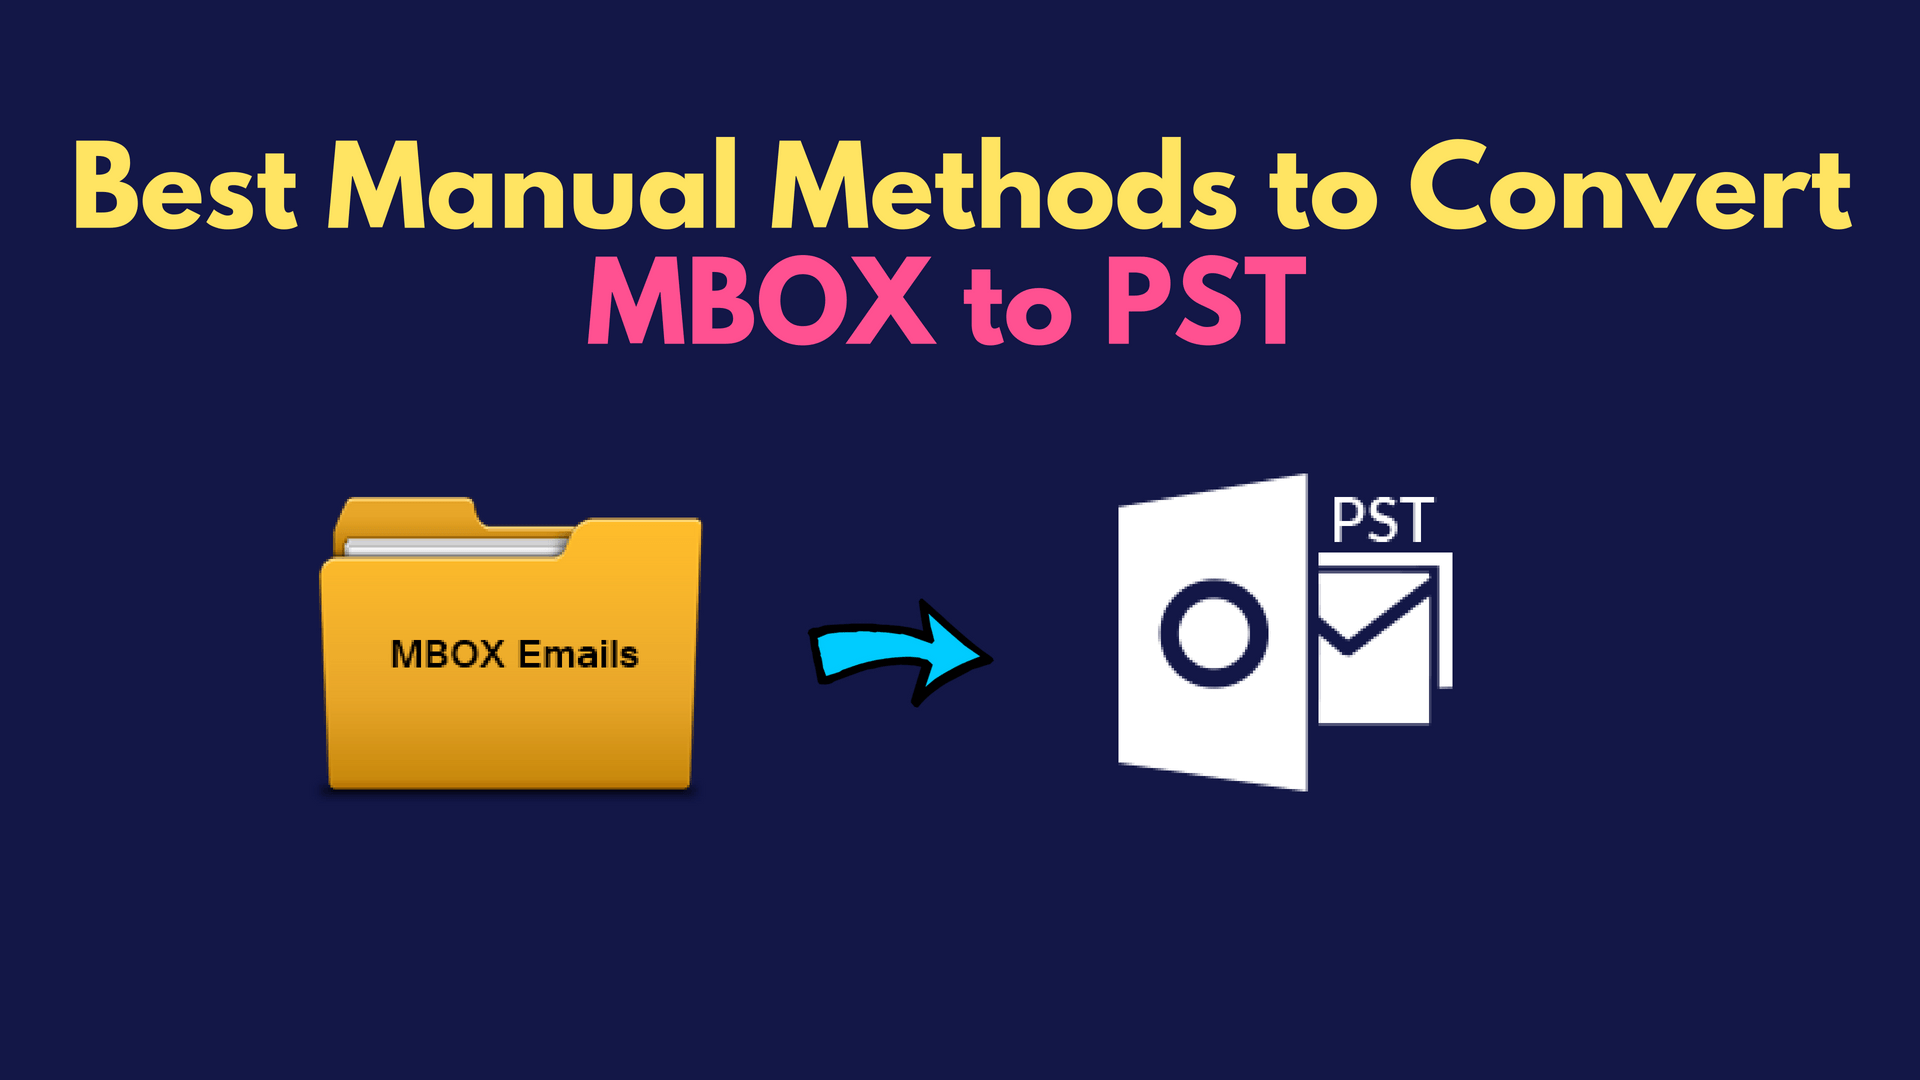 MBOX to PST